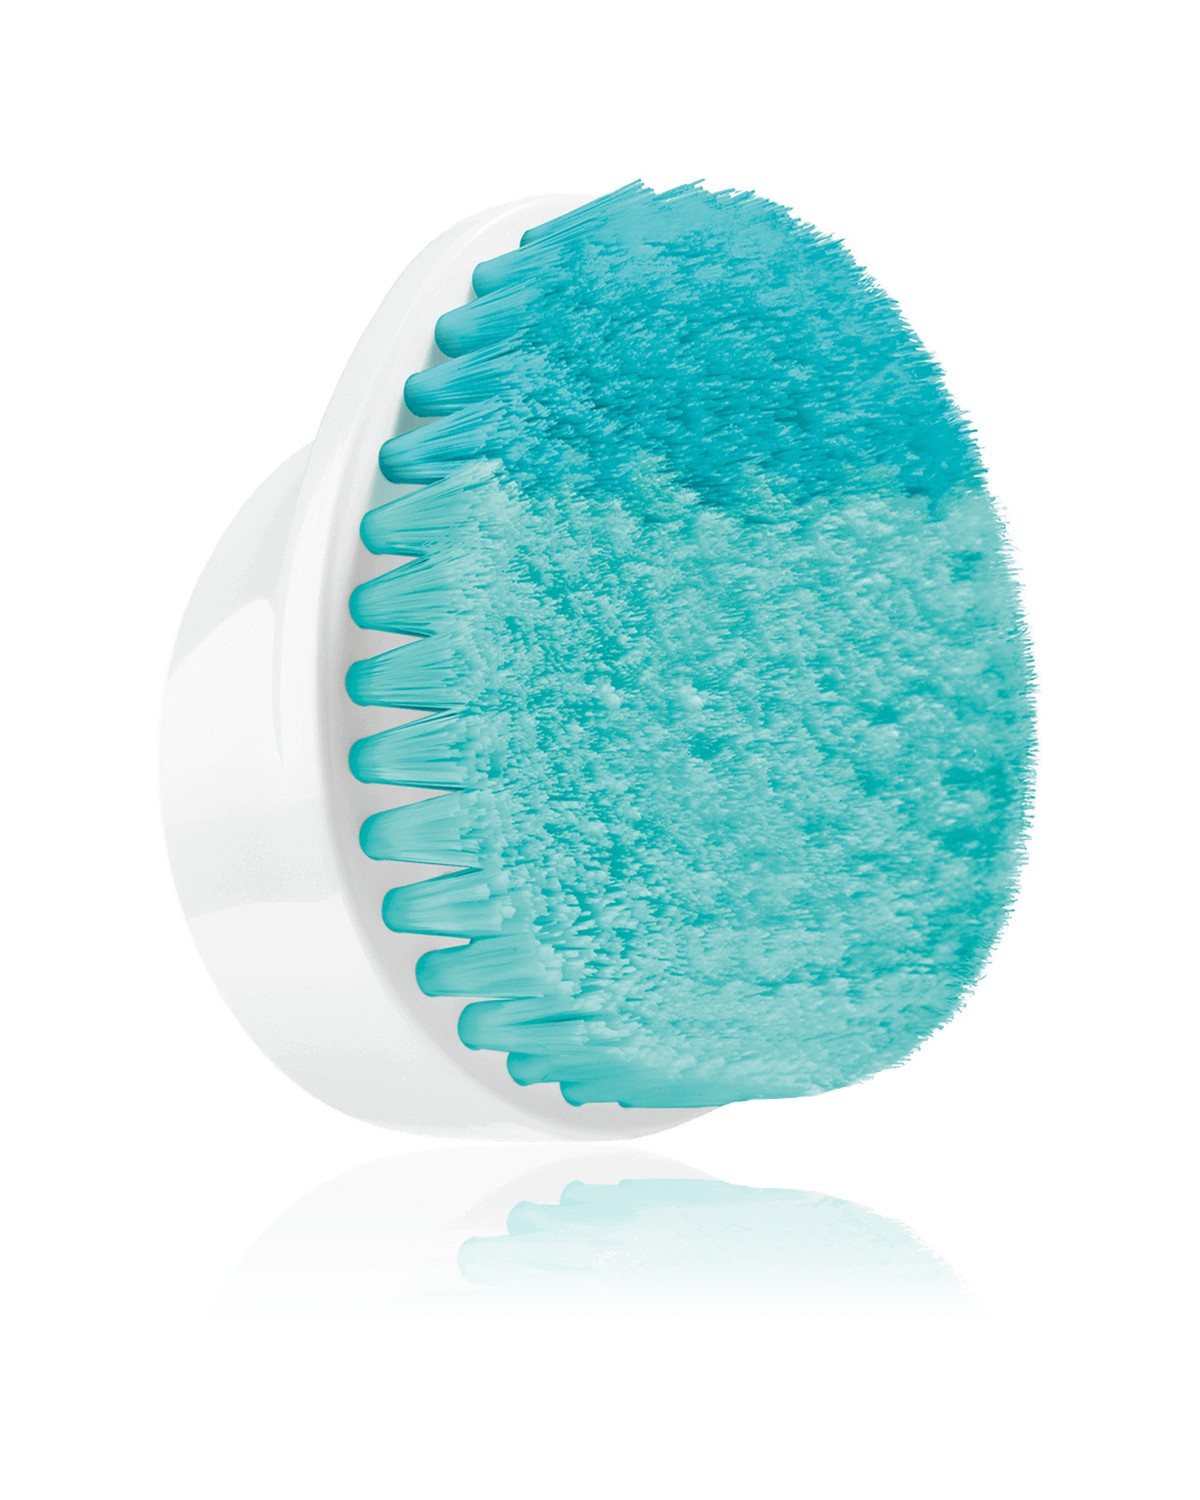 Clinique Sonic System Acne Solutions Deep Cleansing Brush Head